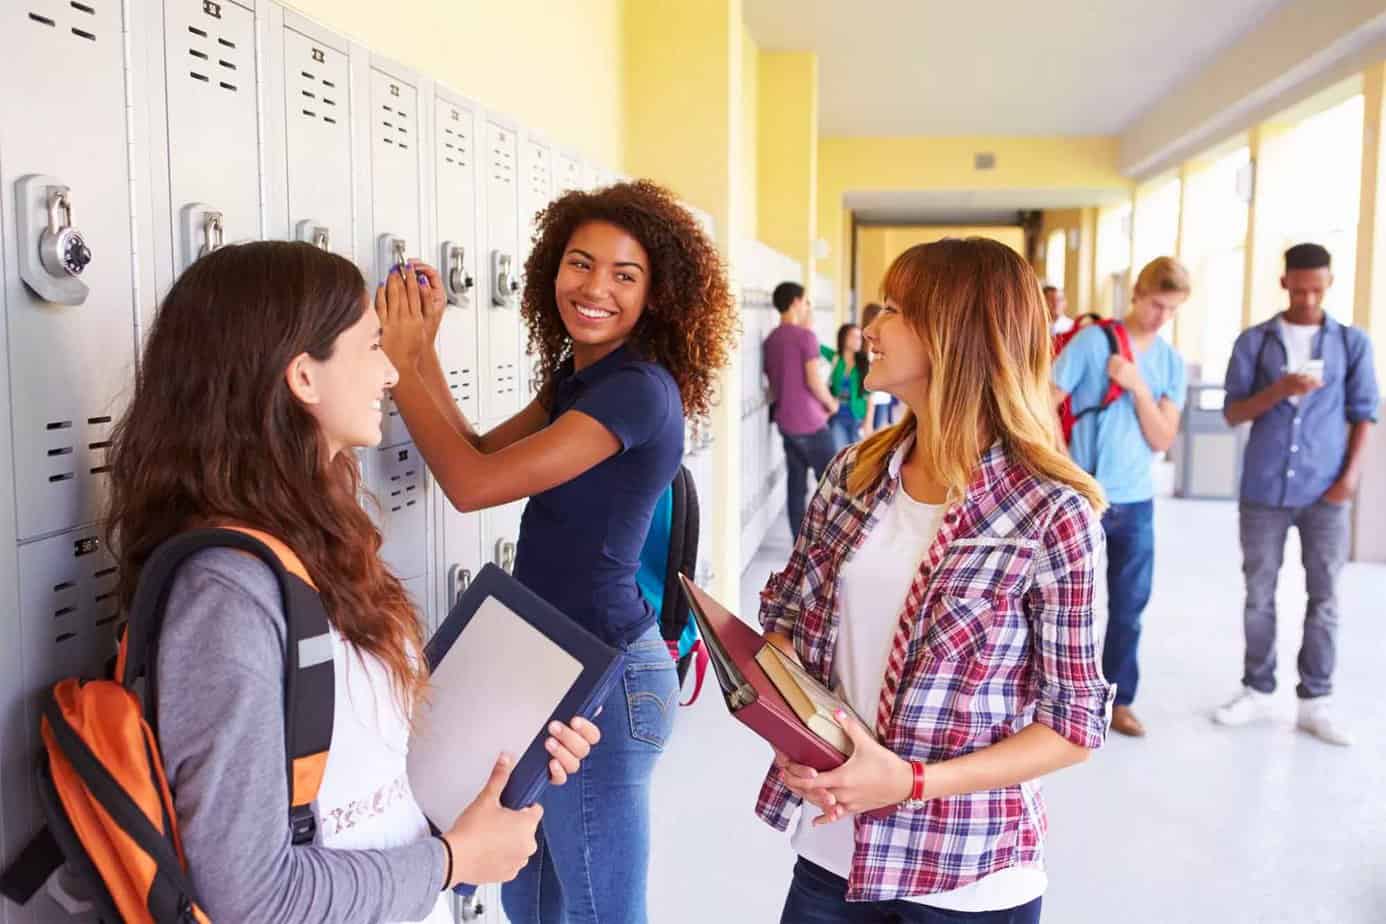 three teenage girls talking and smiling by lockers between classes at high school